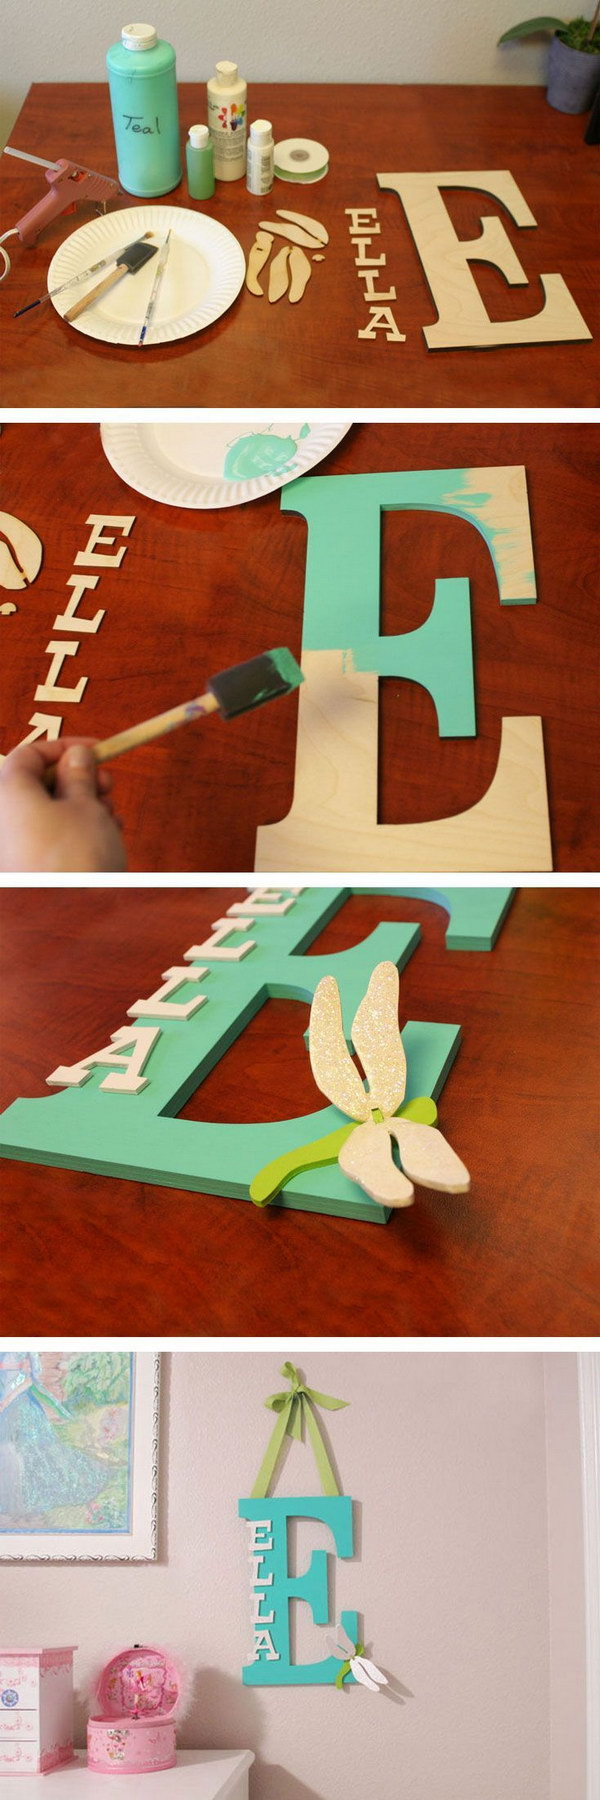 DIY Painting Wooden Letters
 DIY Letter Ideas & Tutorials Hative